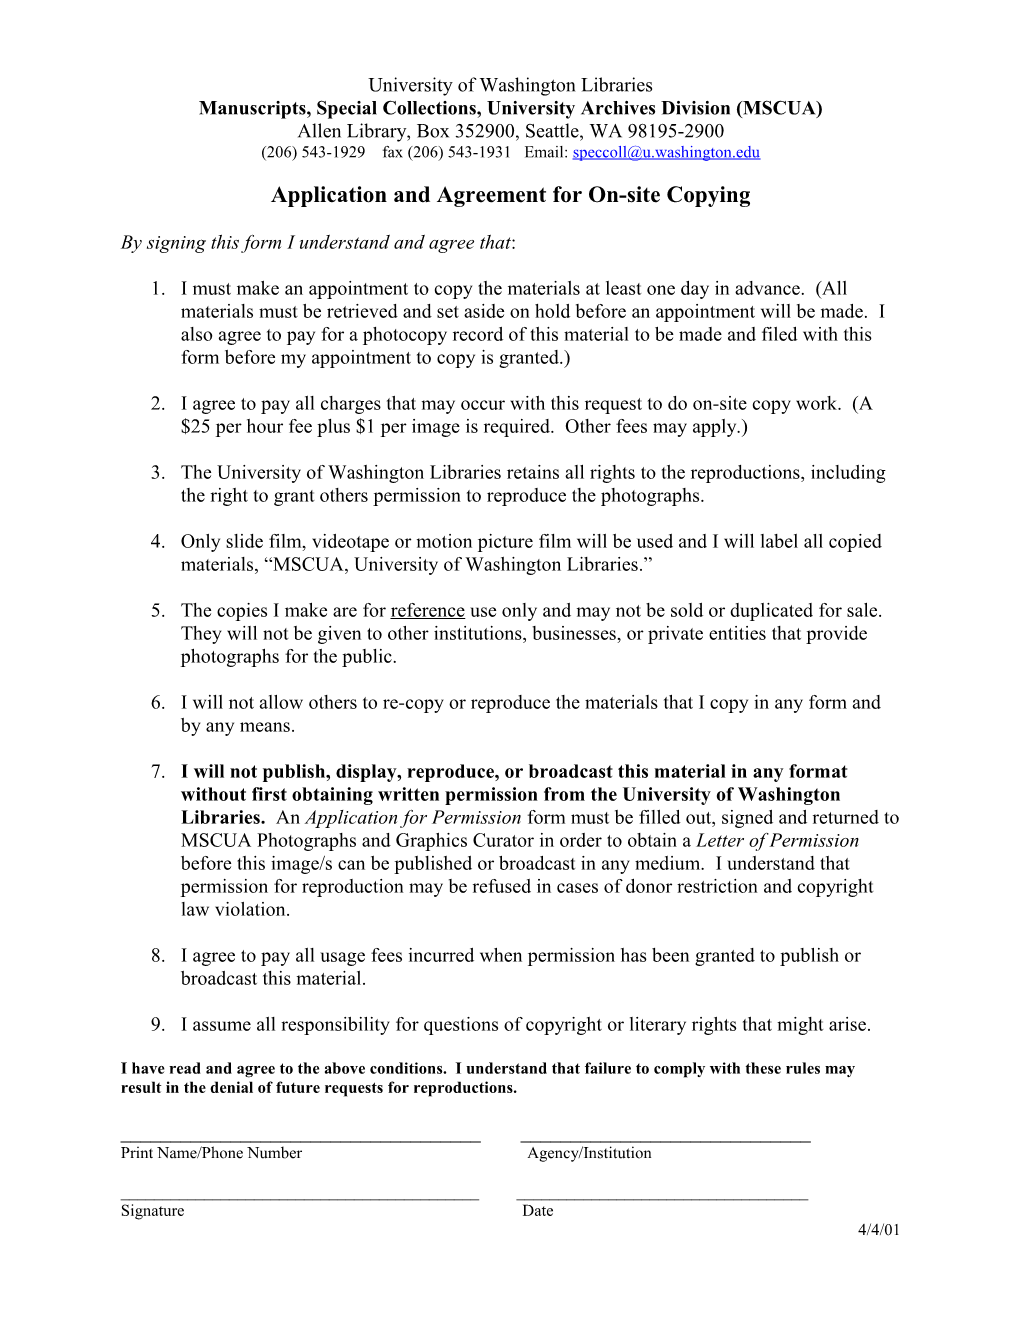 Reproduction Agreement Form/Photo Order Form